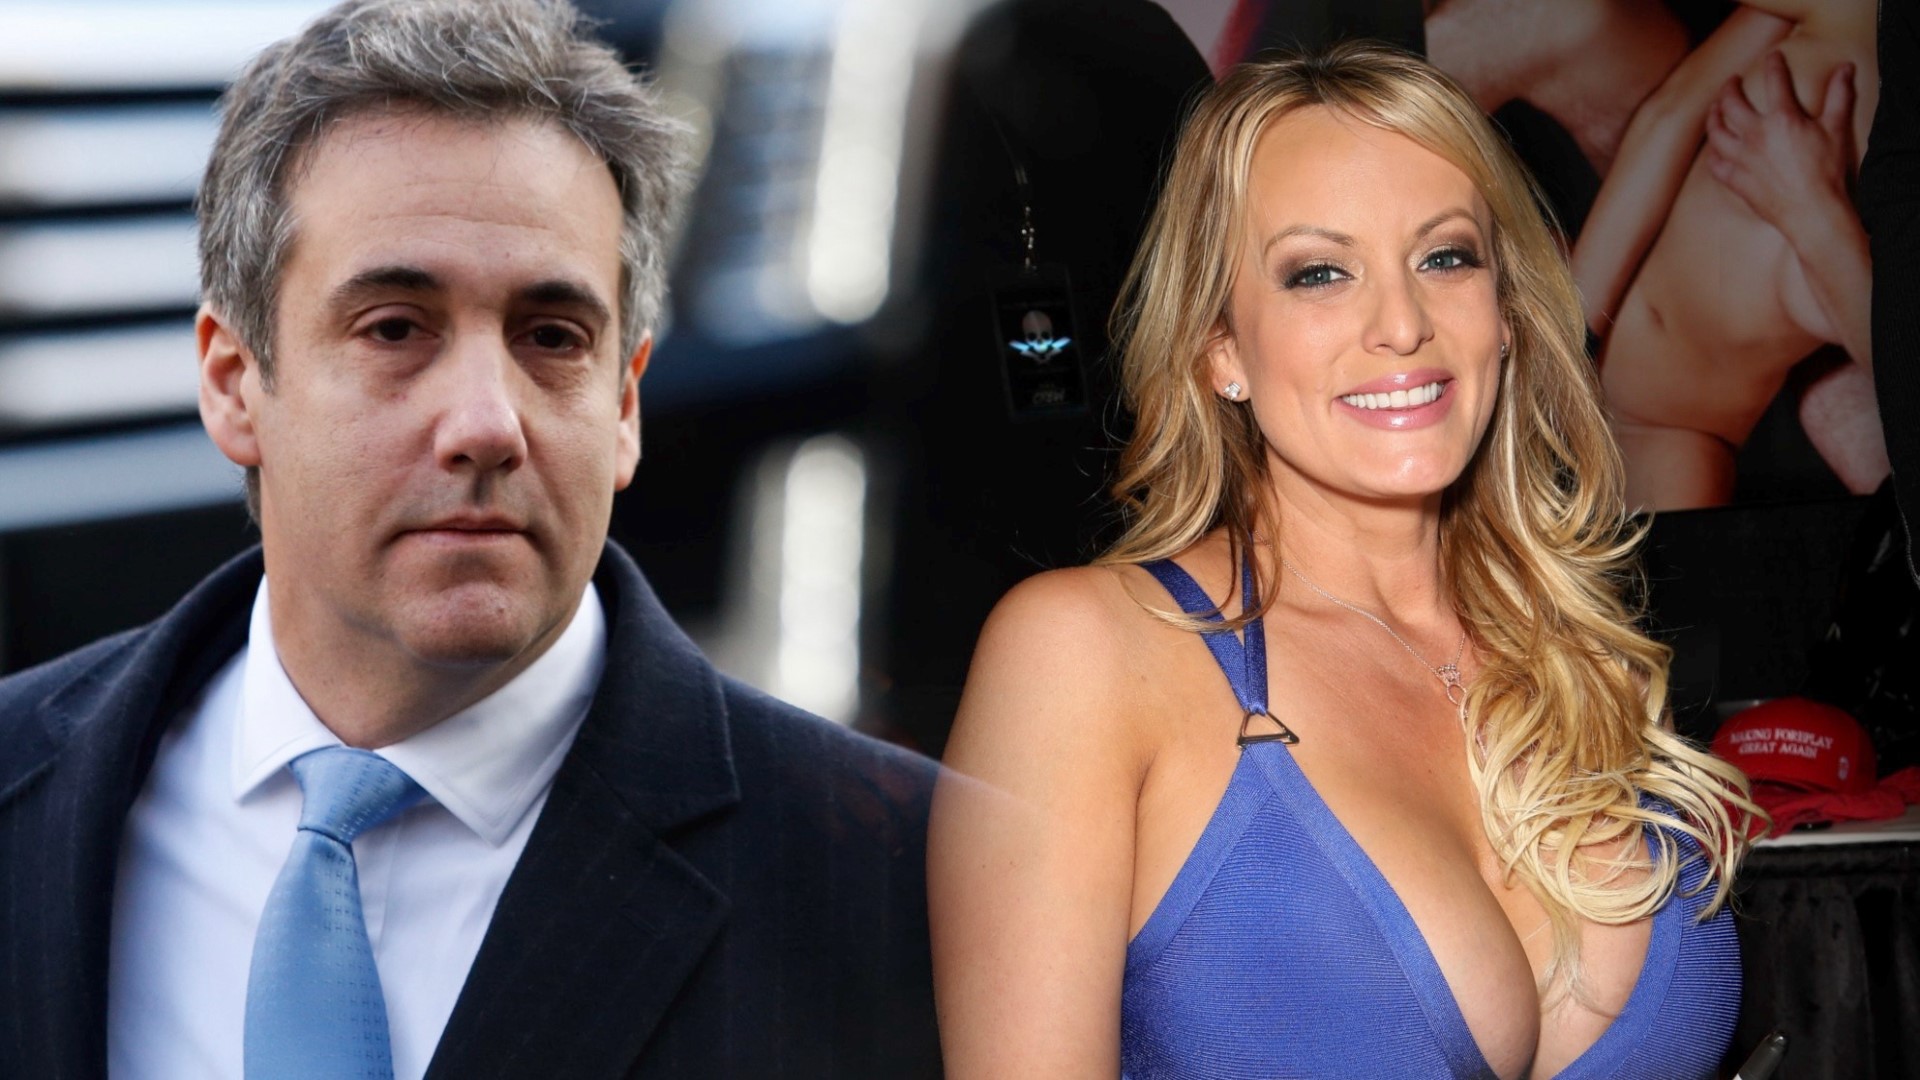 Former Trump lawyer Michael Cohen and porn star Stormy Daniels have reunited for a podcast.